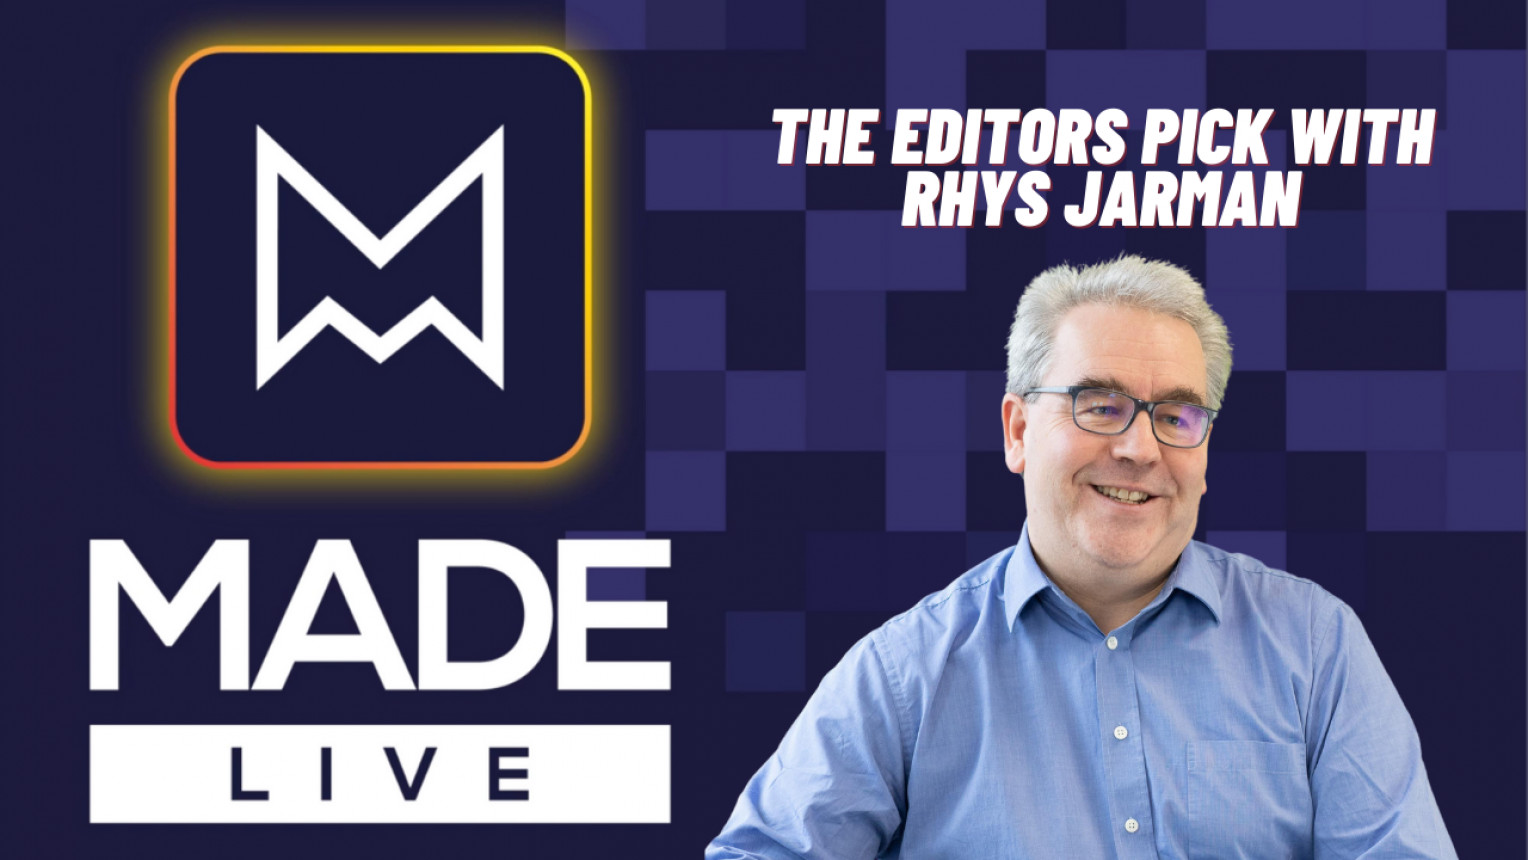 Made LIVE TV: The Editor's Pick with Rhys Jarman